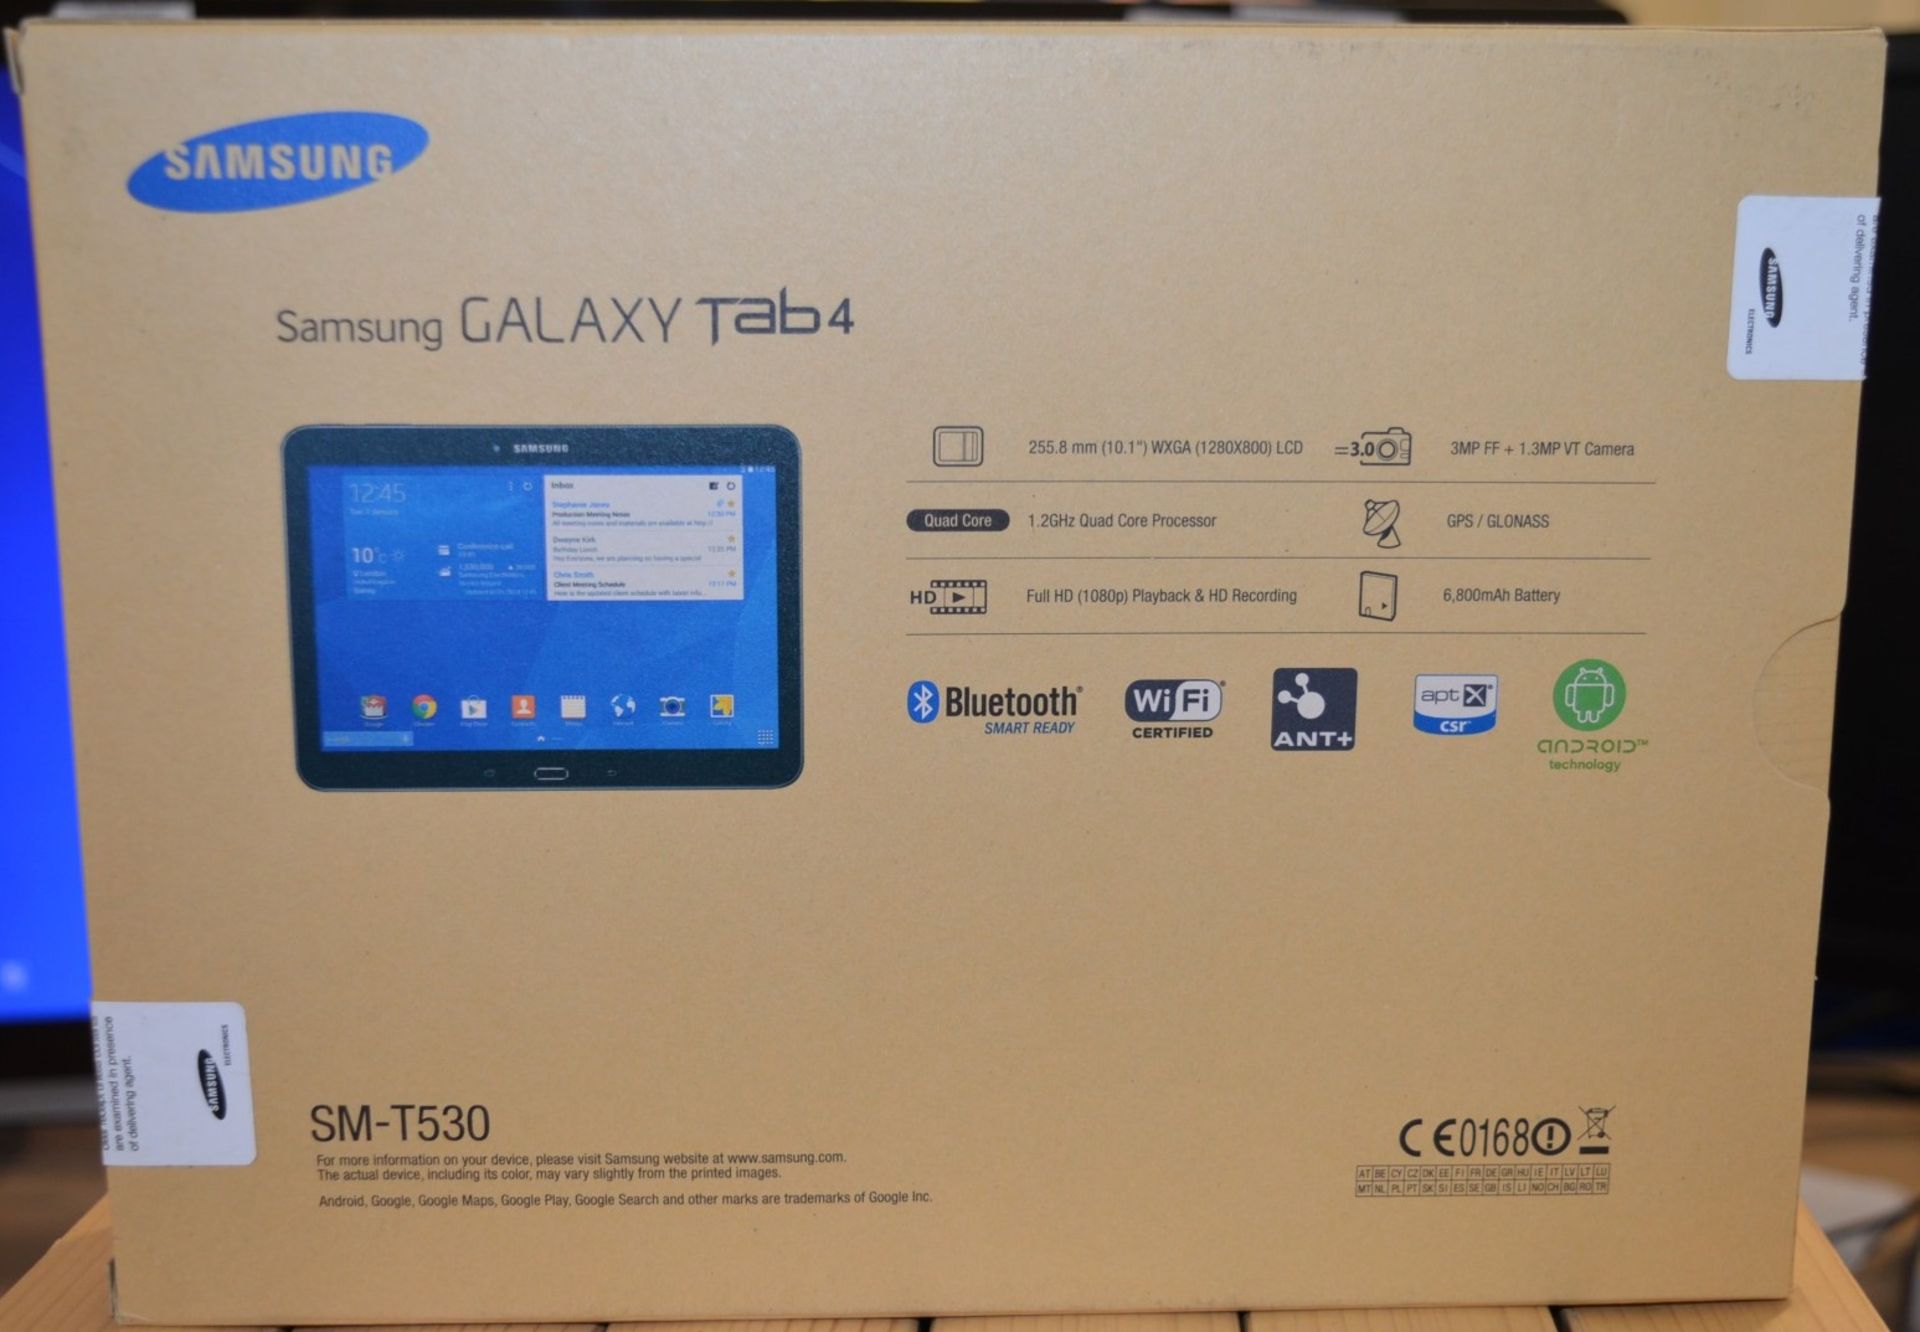 7 x Empty Samsung Galaxy Tab4 Table Retail Boxes - CL300 - Ref CAT113 - Empty Boxes May Have Some In - Image 5 of 6